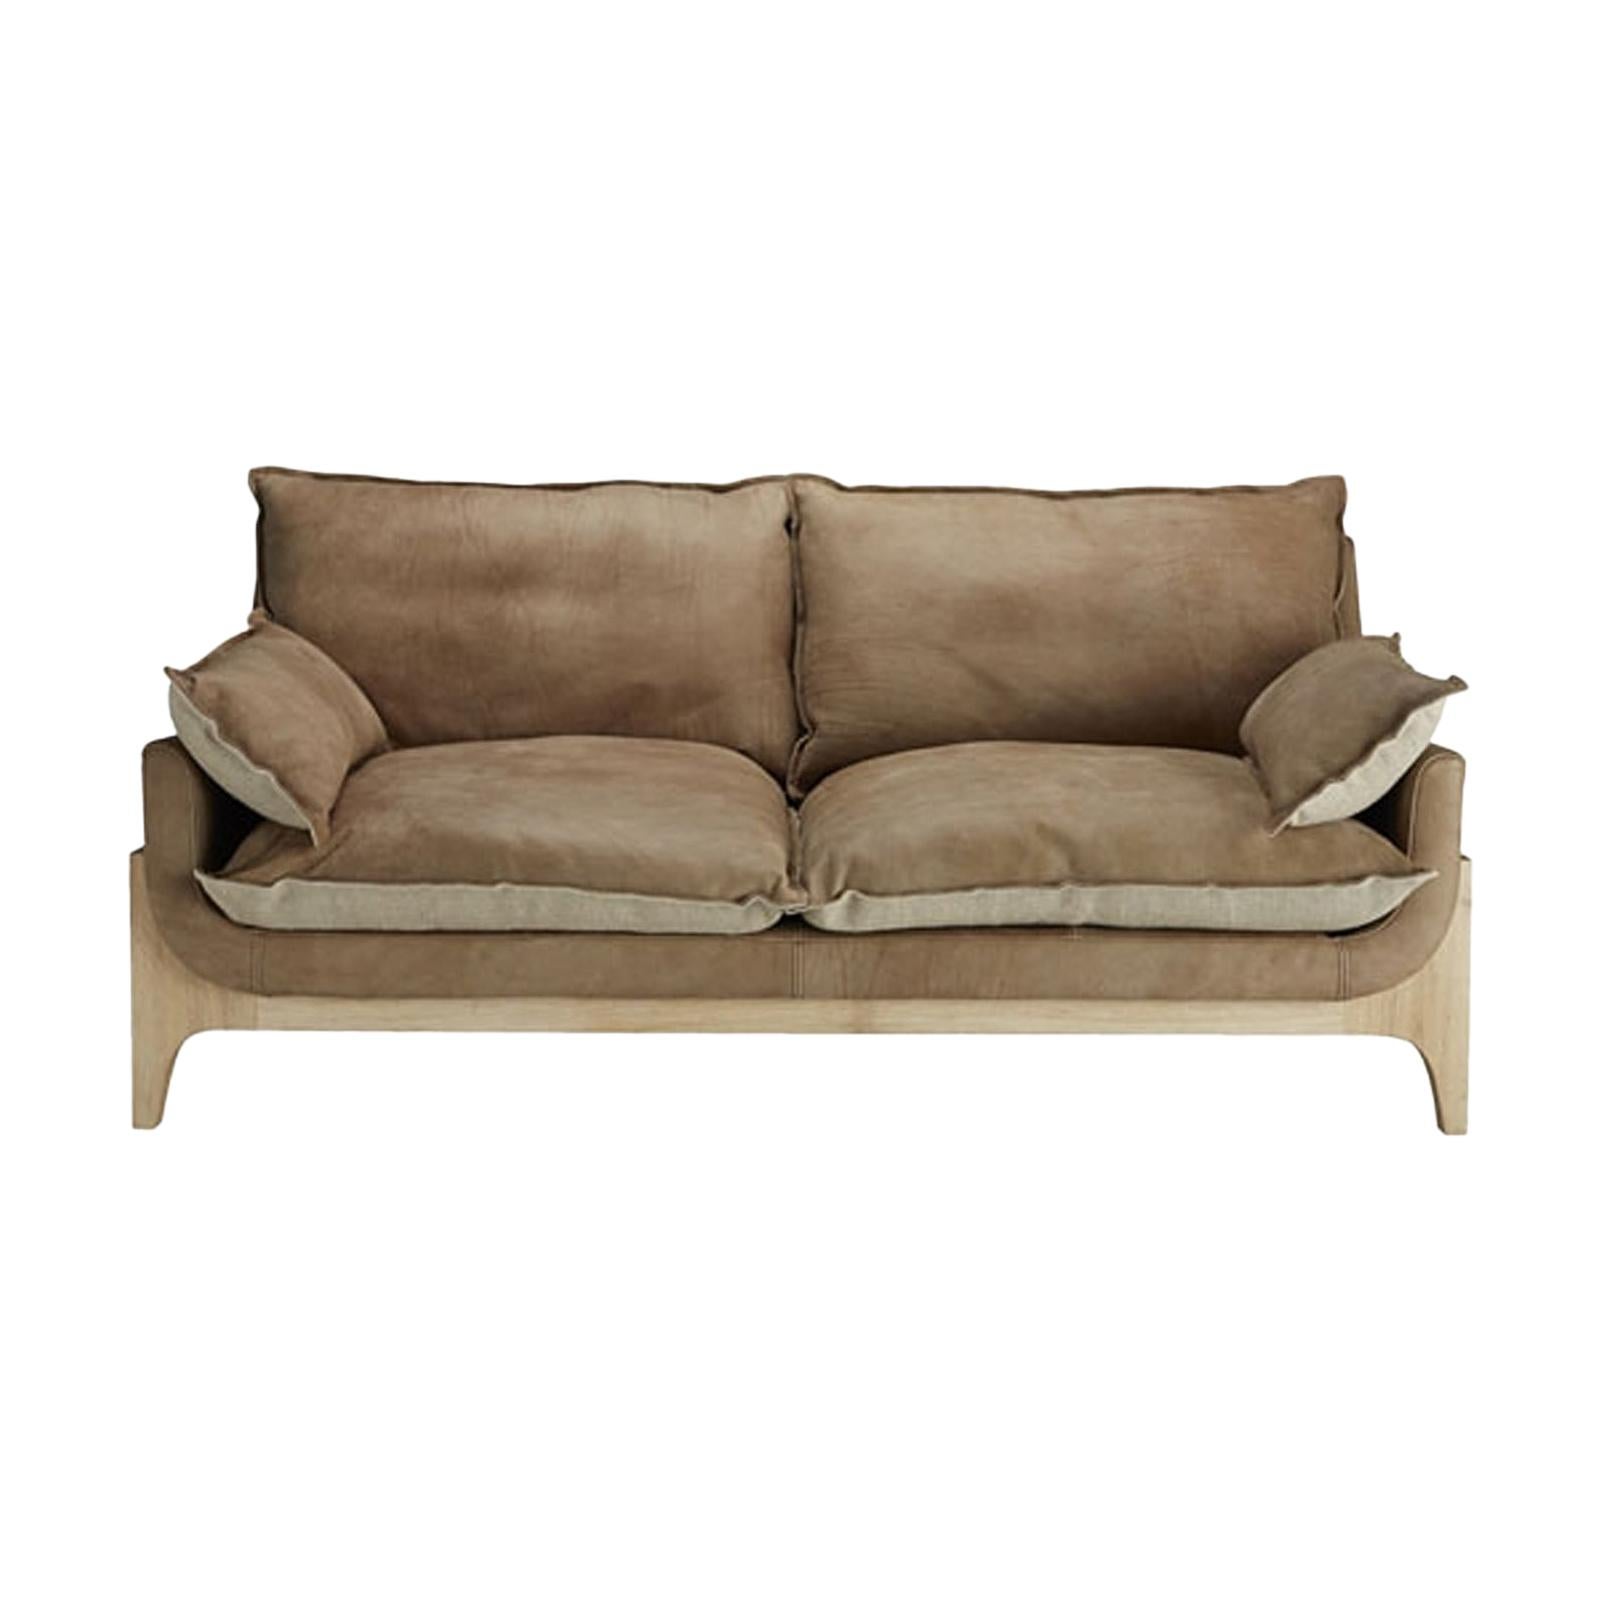 Indiana Sofa High Quality Genuine Leather and Linen For Sale